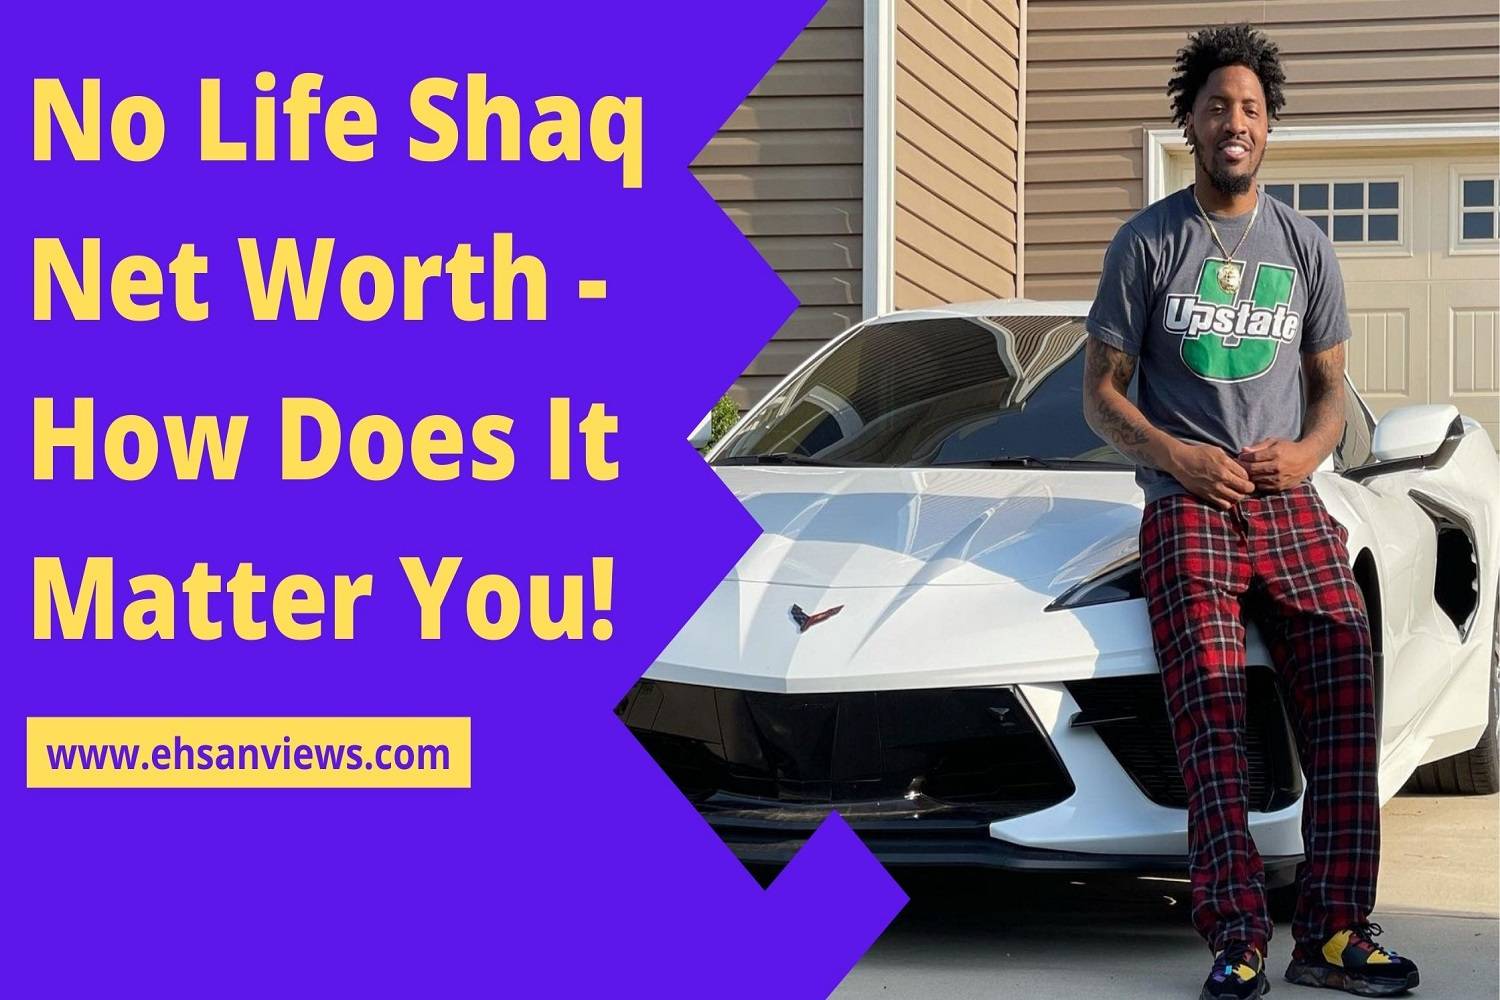 No Life Shaq Net Worth - How Does It Matter You! | Abdul Ehsan | Entrepreneur and Digital Marketing Consultant in Sri Lanka